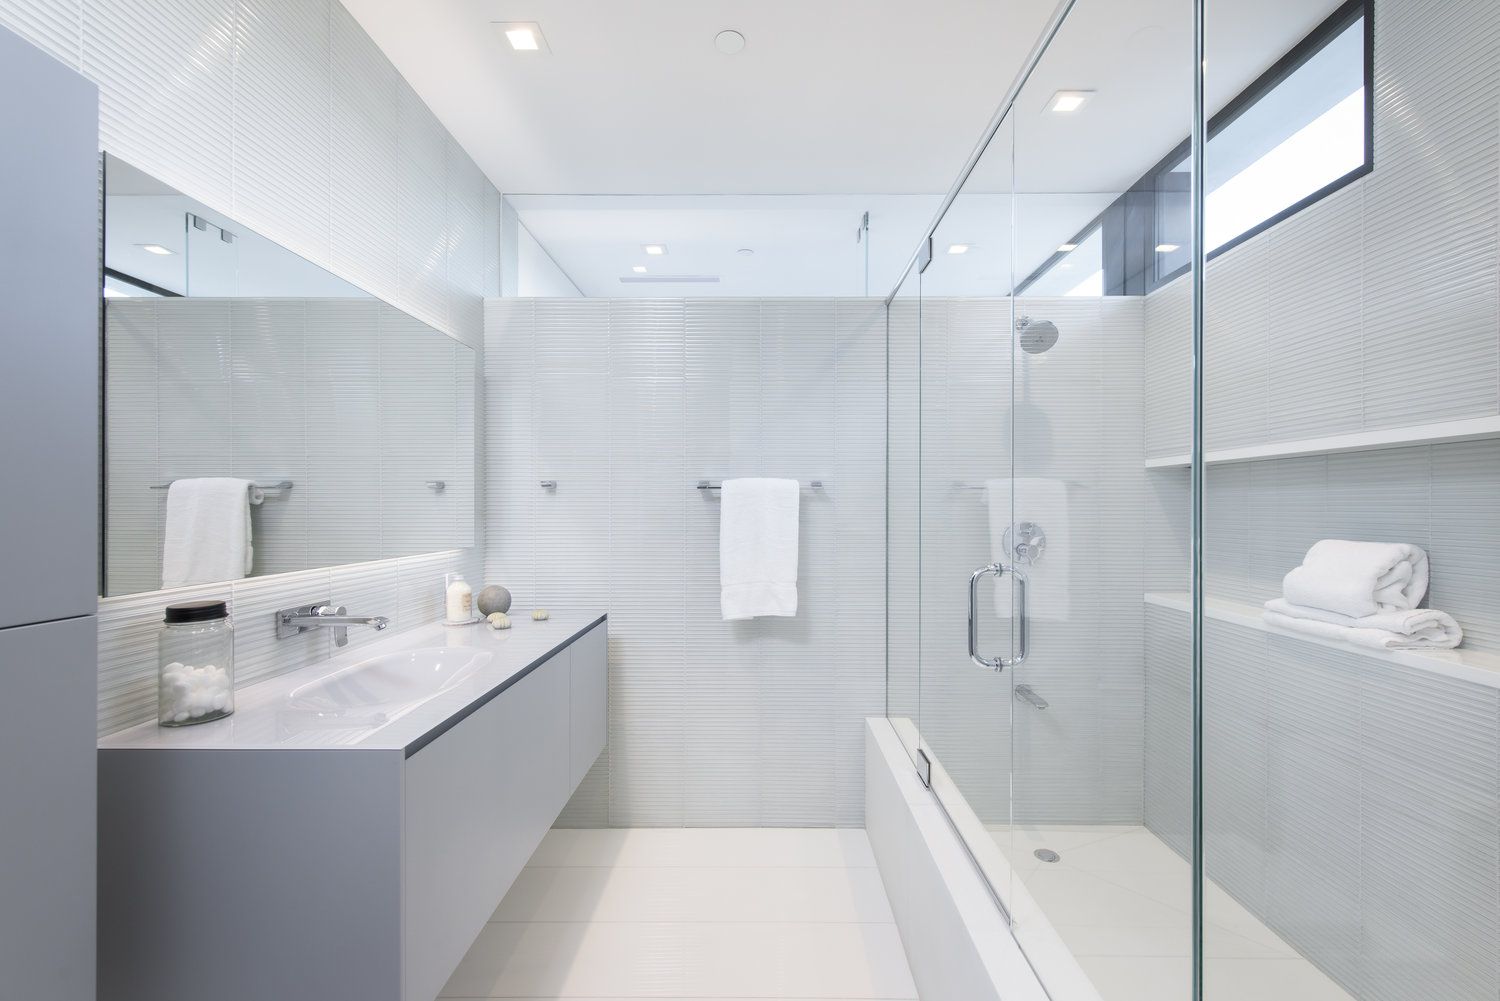 If you're looking for ways to elevate the style of your gray bathroom, consider using glass accents. Glass accents can add a touch of elegance and sophistication to your bathroom while also creating a sense of spaciousness. You can use glass in a variety of ways, from shower doors and partitions to shelves and decorative accents. 